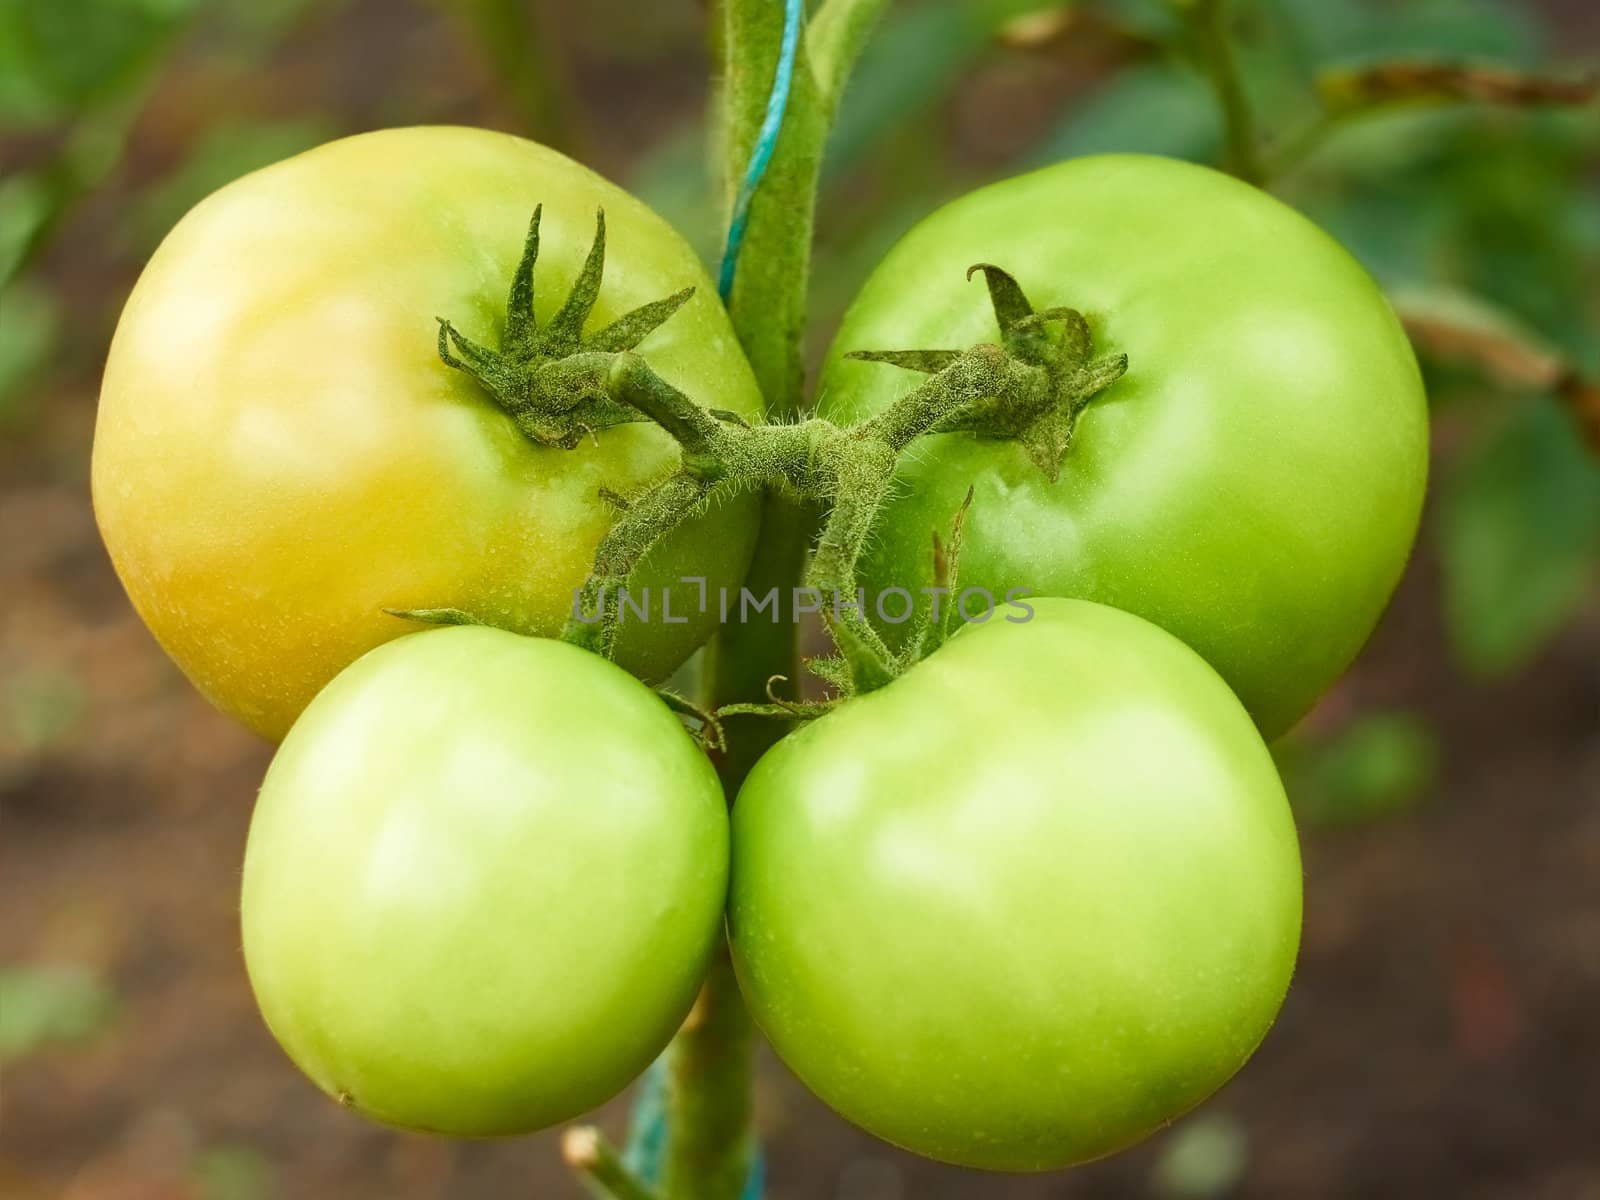 Four green tomatoes in greenhouse by qiiip